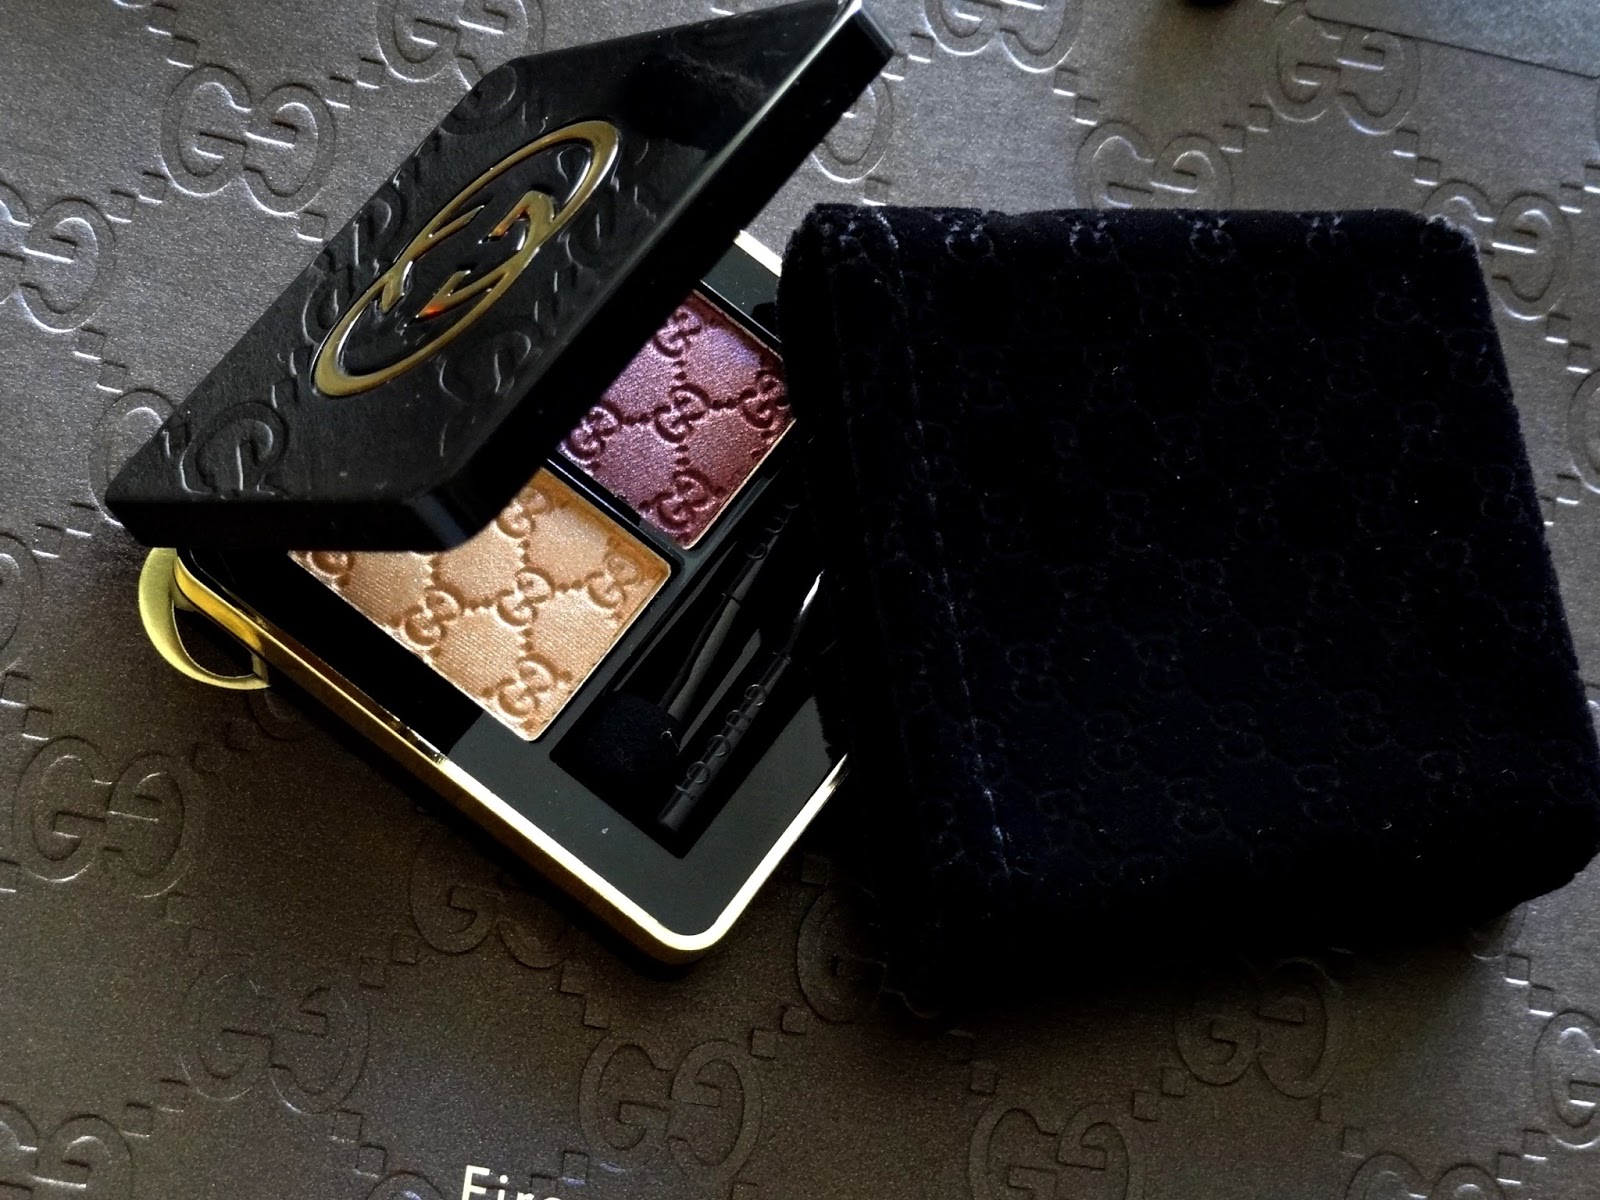 Gucci Beauty Magnetic Color Eye Shadow Duo in Azalea Review, Photos & Swatches